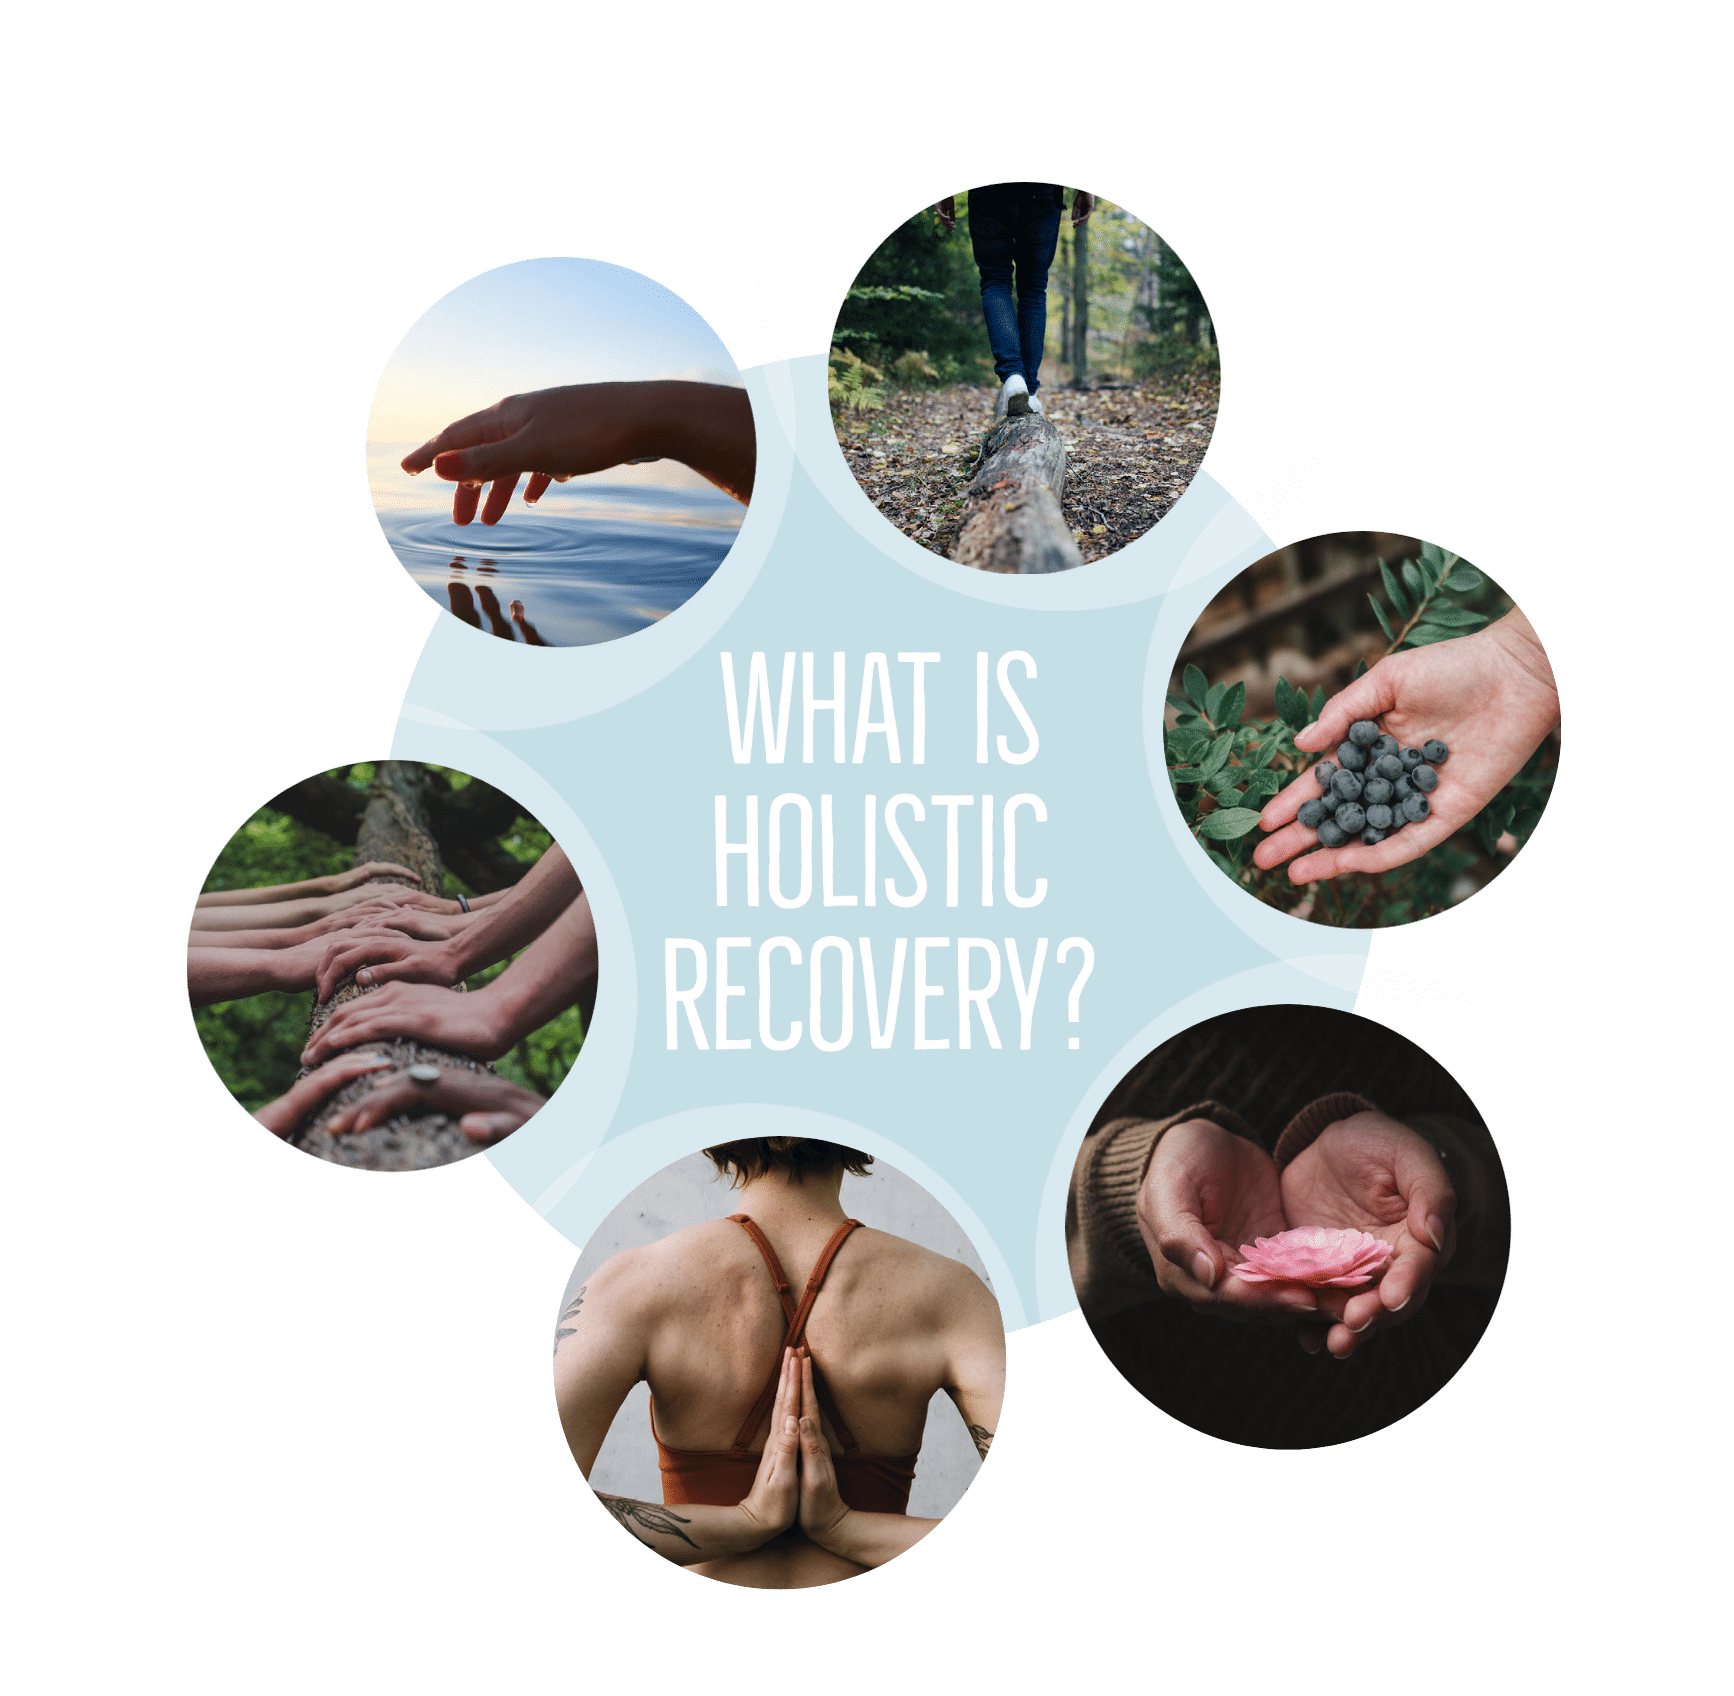 What is Holistic Recovery